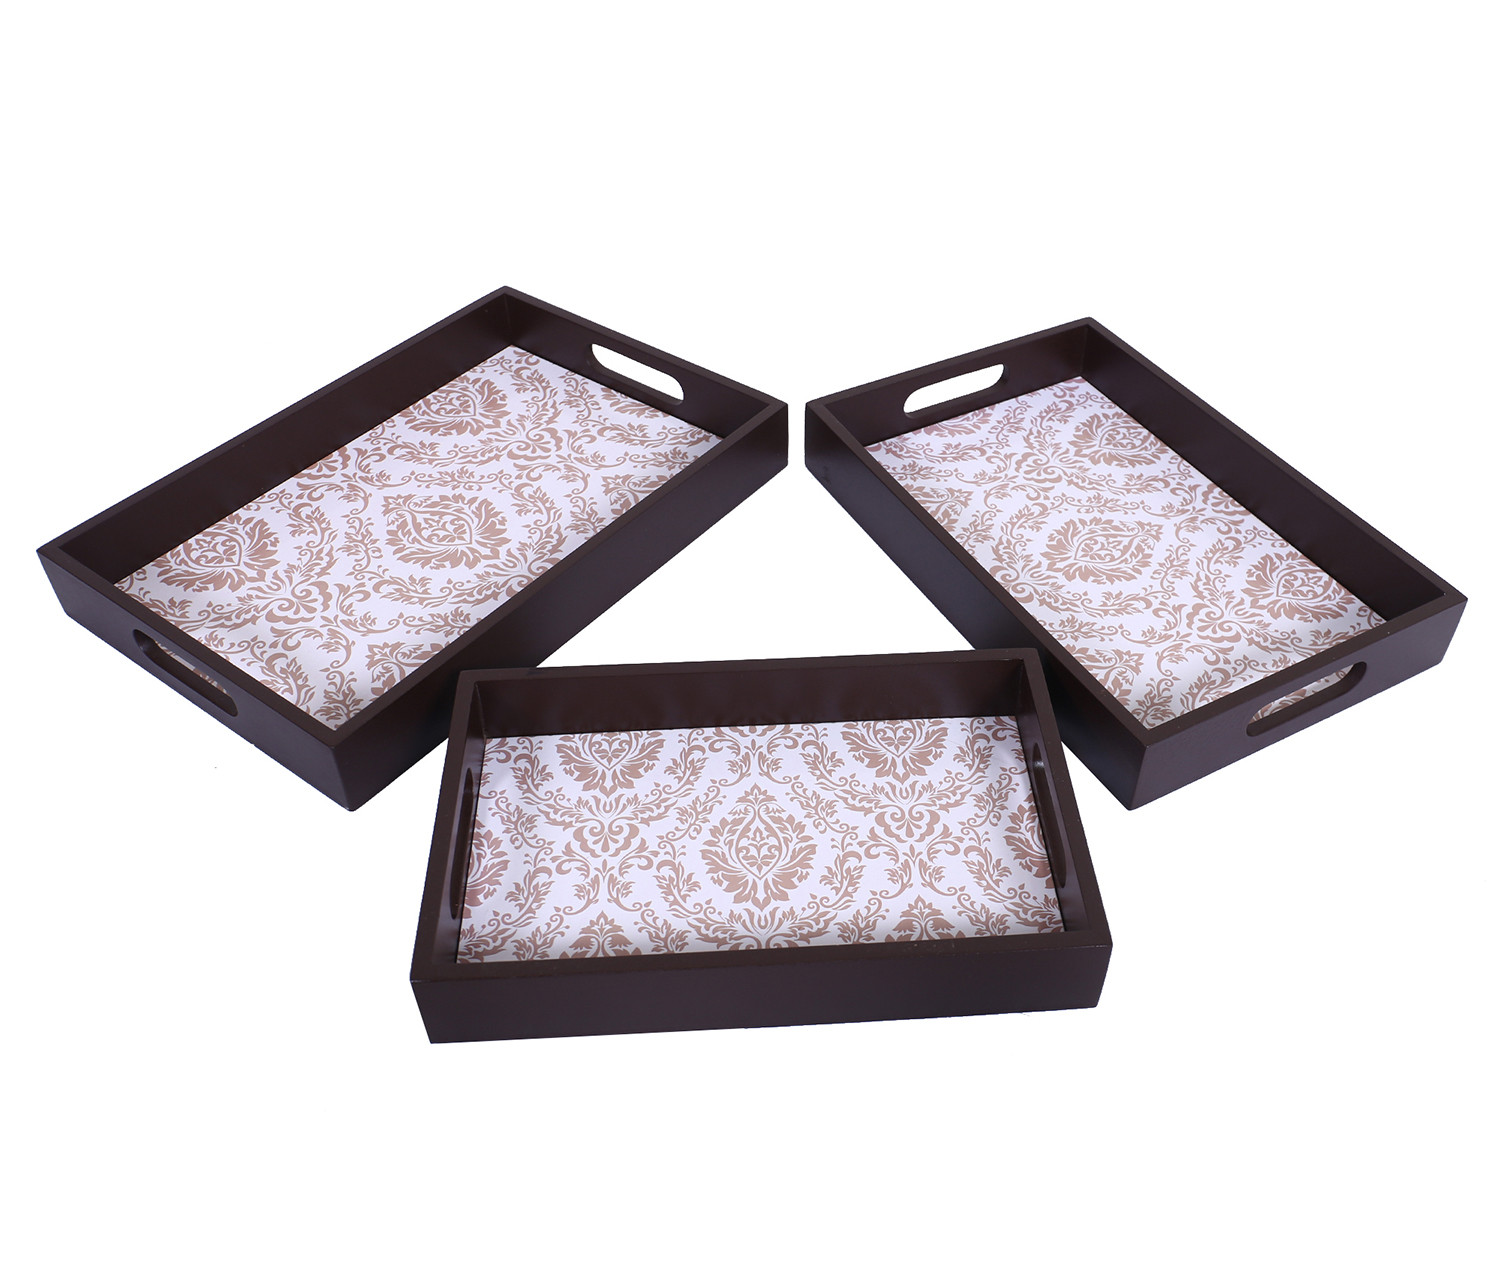 Kuber Industries Nested Serving Trays|Wooden Damask Gold Design Farmhouse Platter|Rectangular Shape Coffee Table Trays with Handle for Kitchen,Dining Area,Set of 3 (Brown)